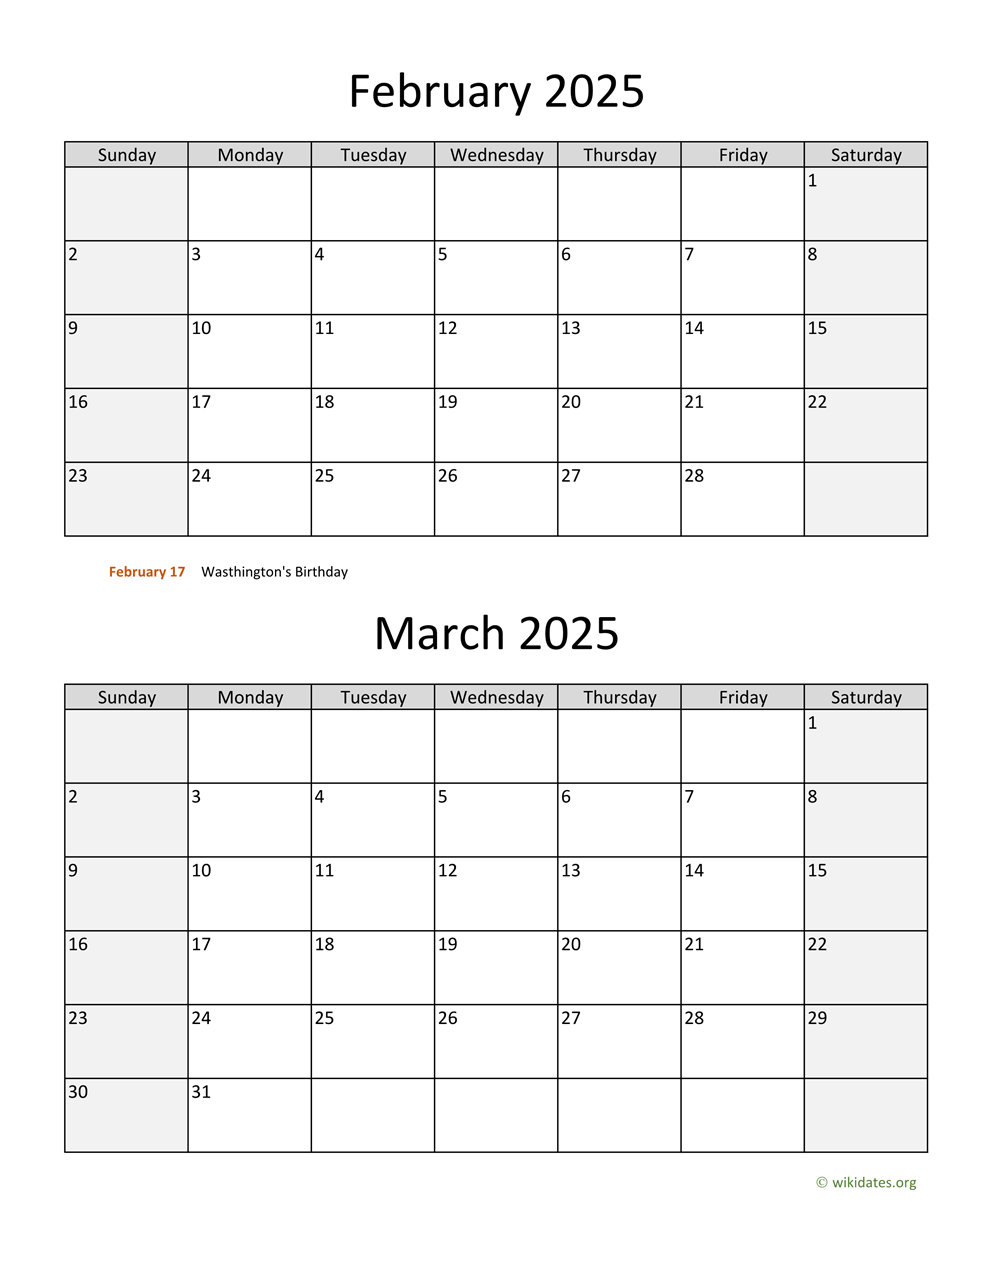 february-and-march-2025-calendar-wikidates